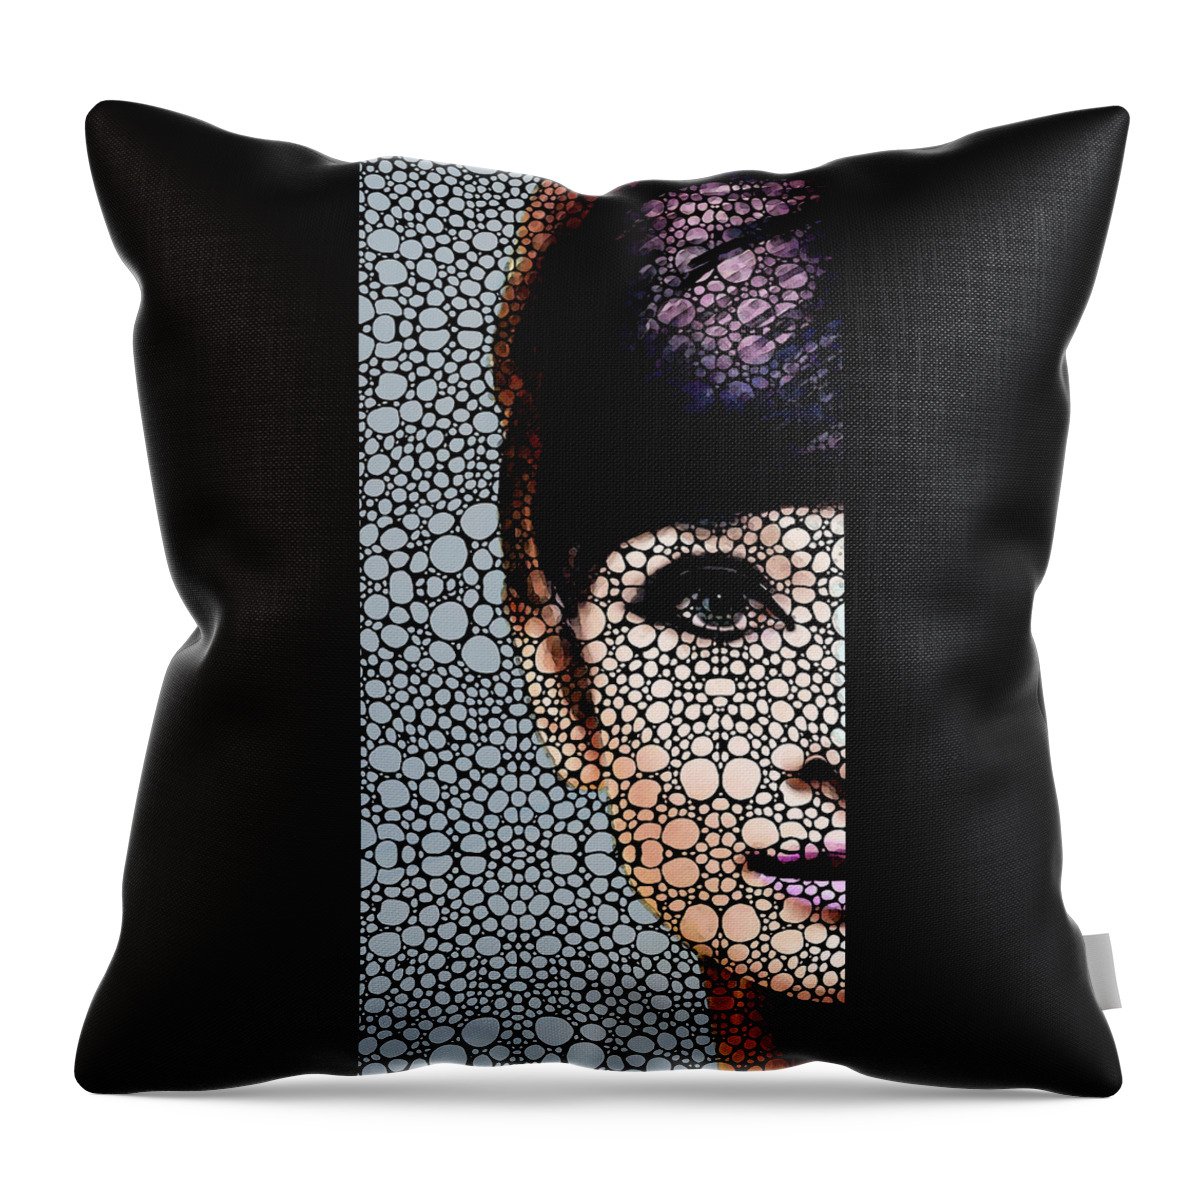 Audrey Hepburn Throw Pillow featuring the painting British Beauty - Audrey Hepburn Tribute by Sharon Cummings